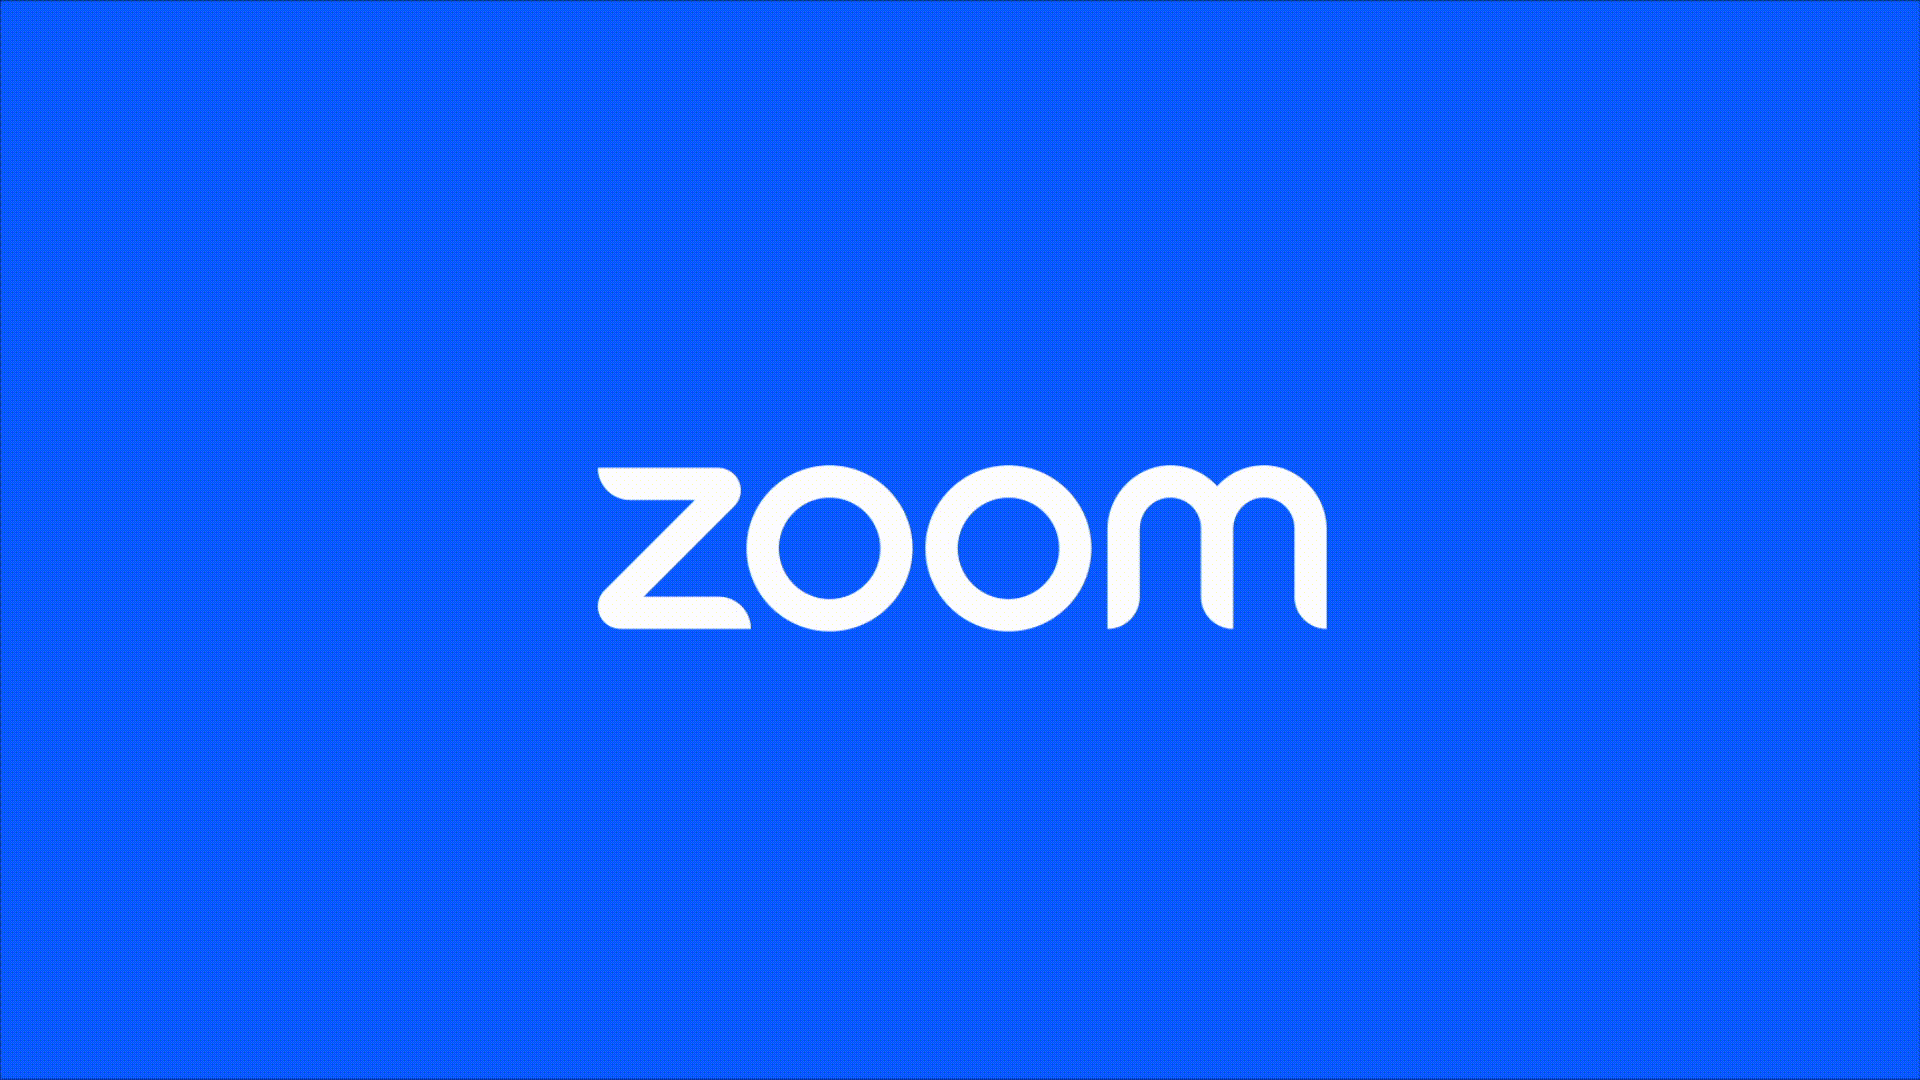 Animated Zoom logo featuring various 'O's